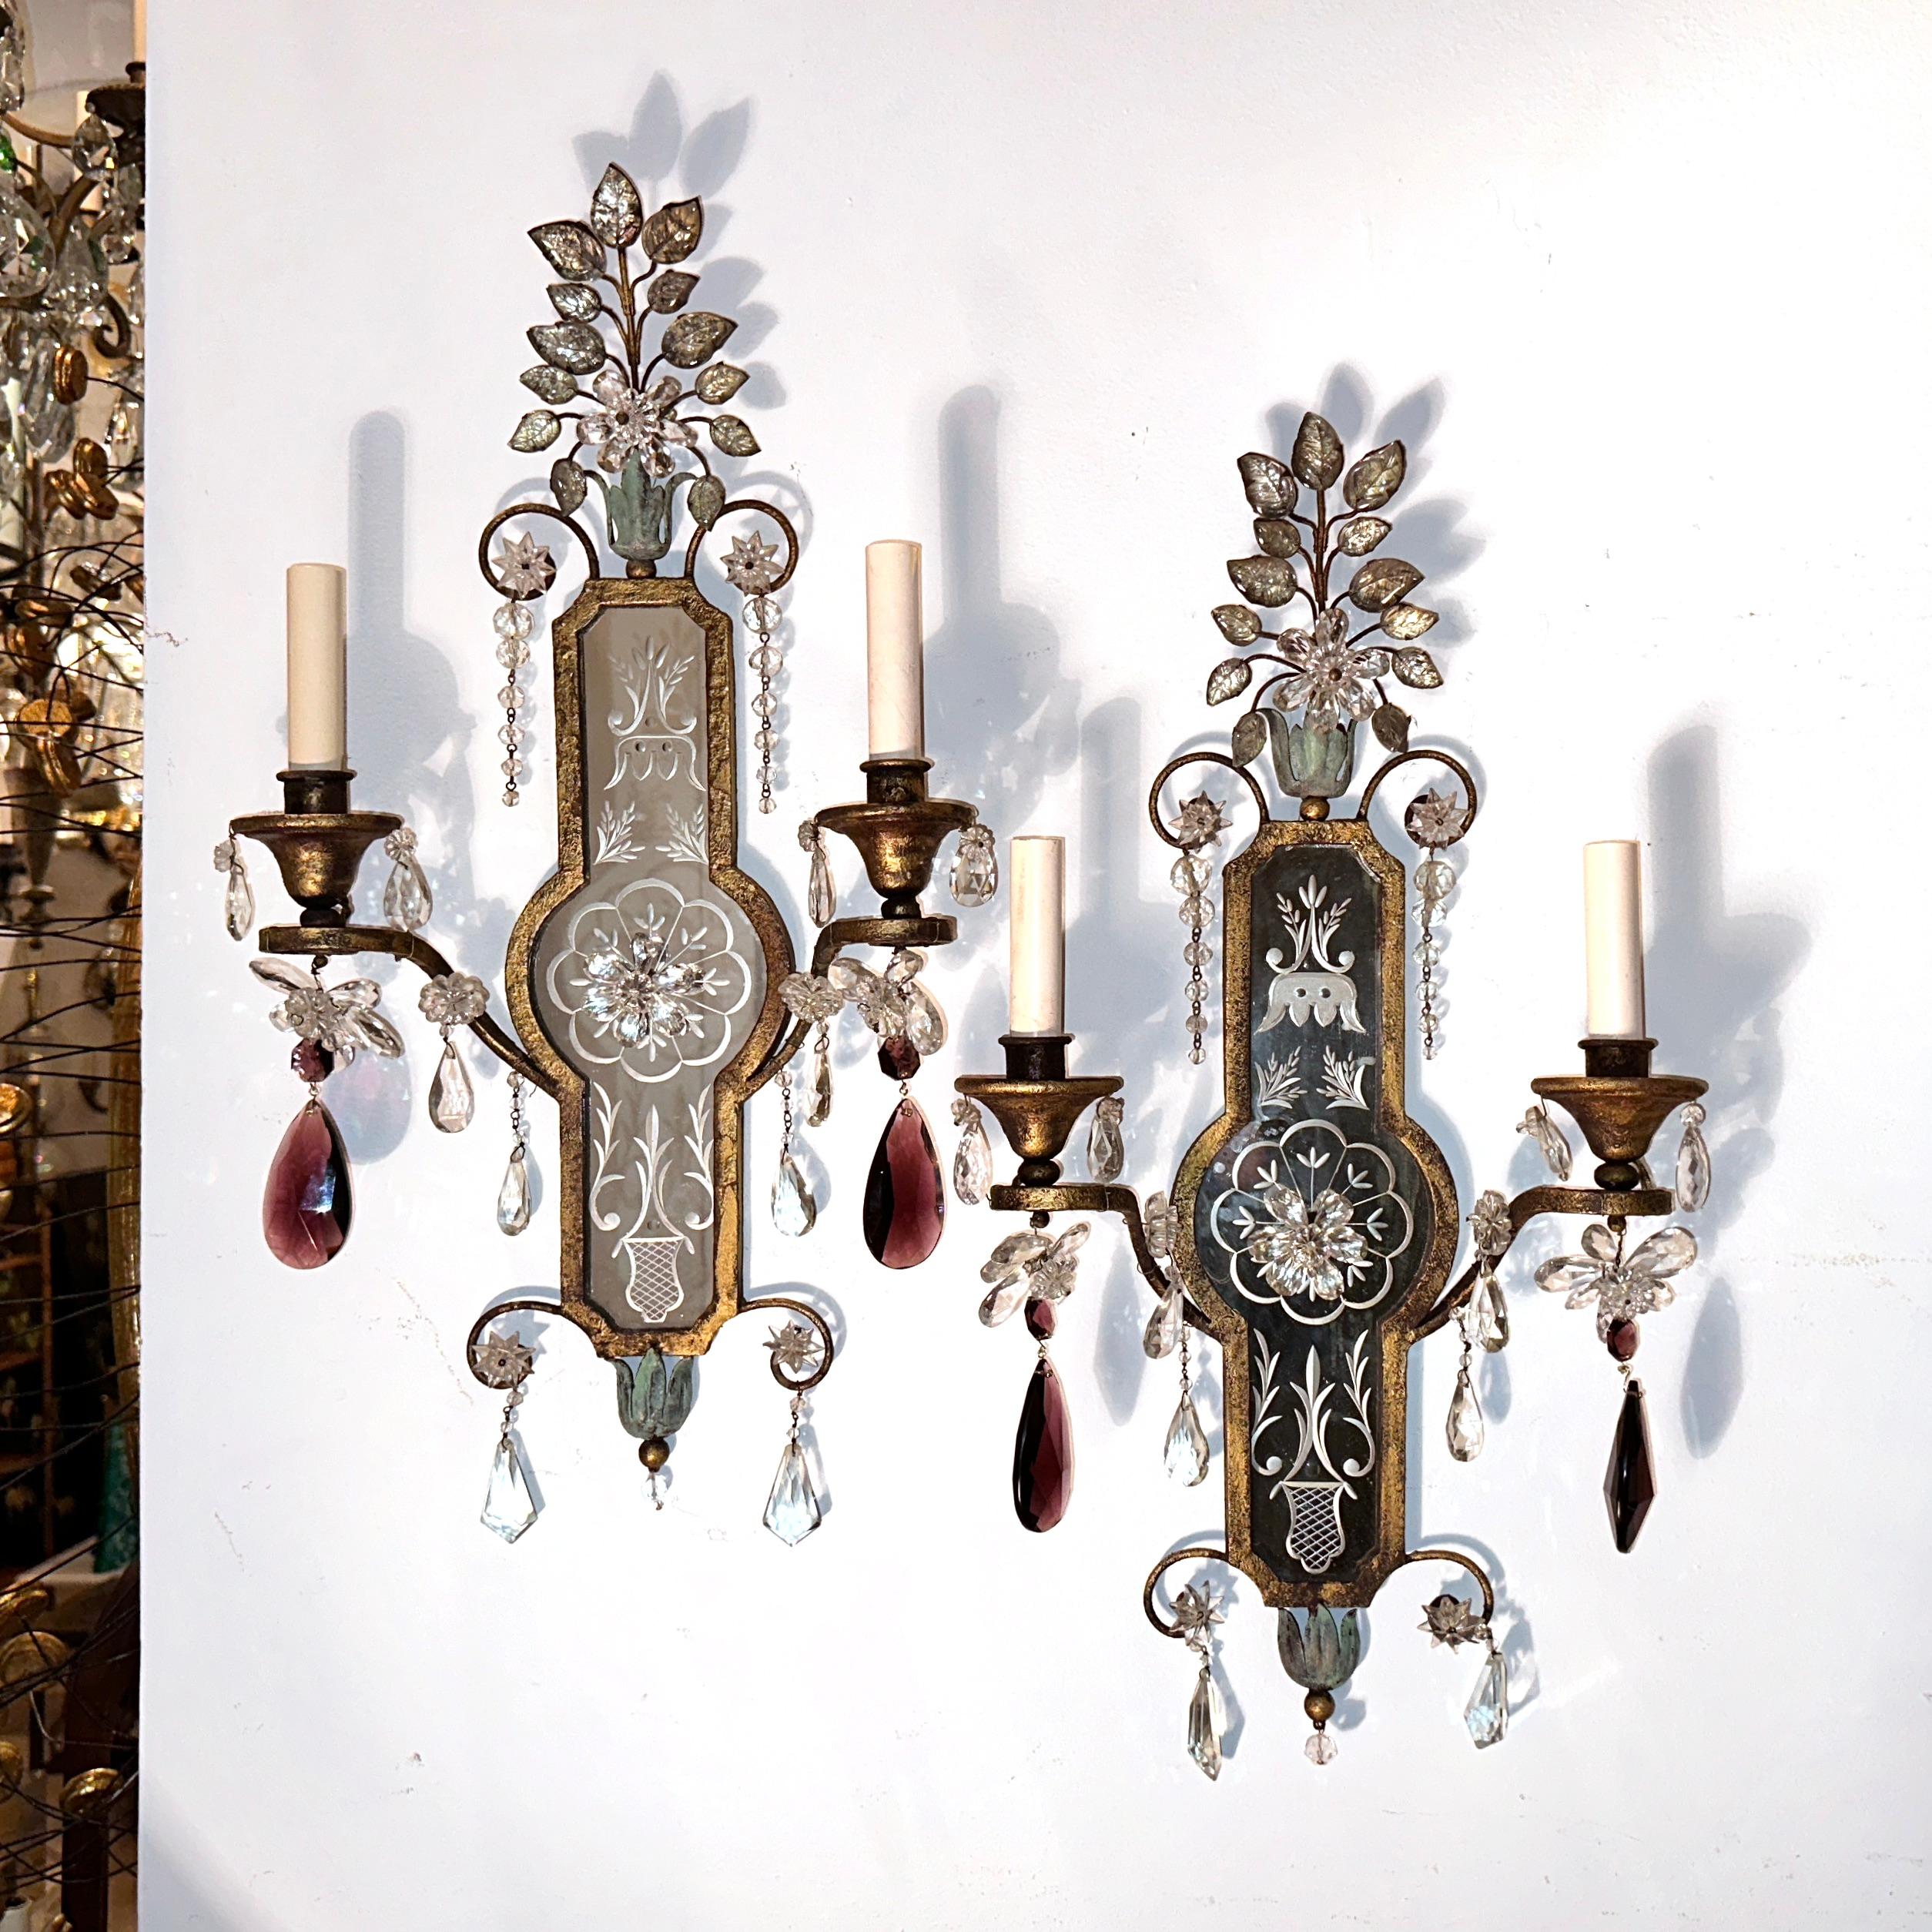 Pair of circa 1940's French gilt metal sconces with mirrored backplates and crystal drops.

Measurements:
Height: 24